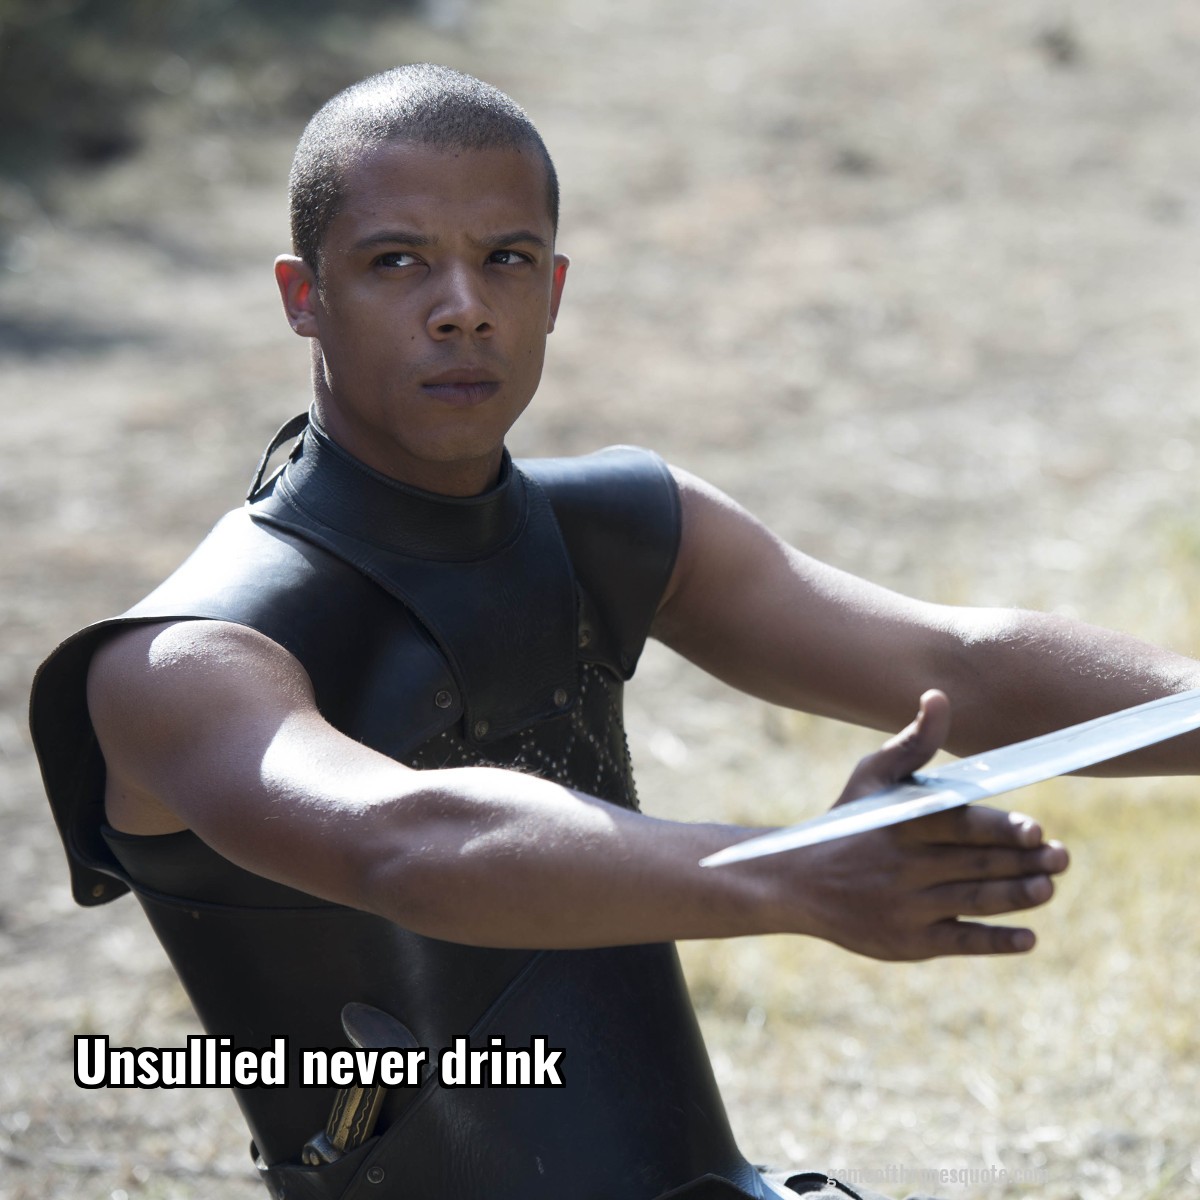 Unsullied never drink